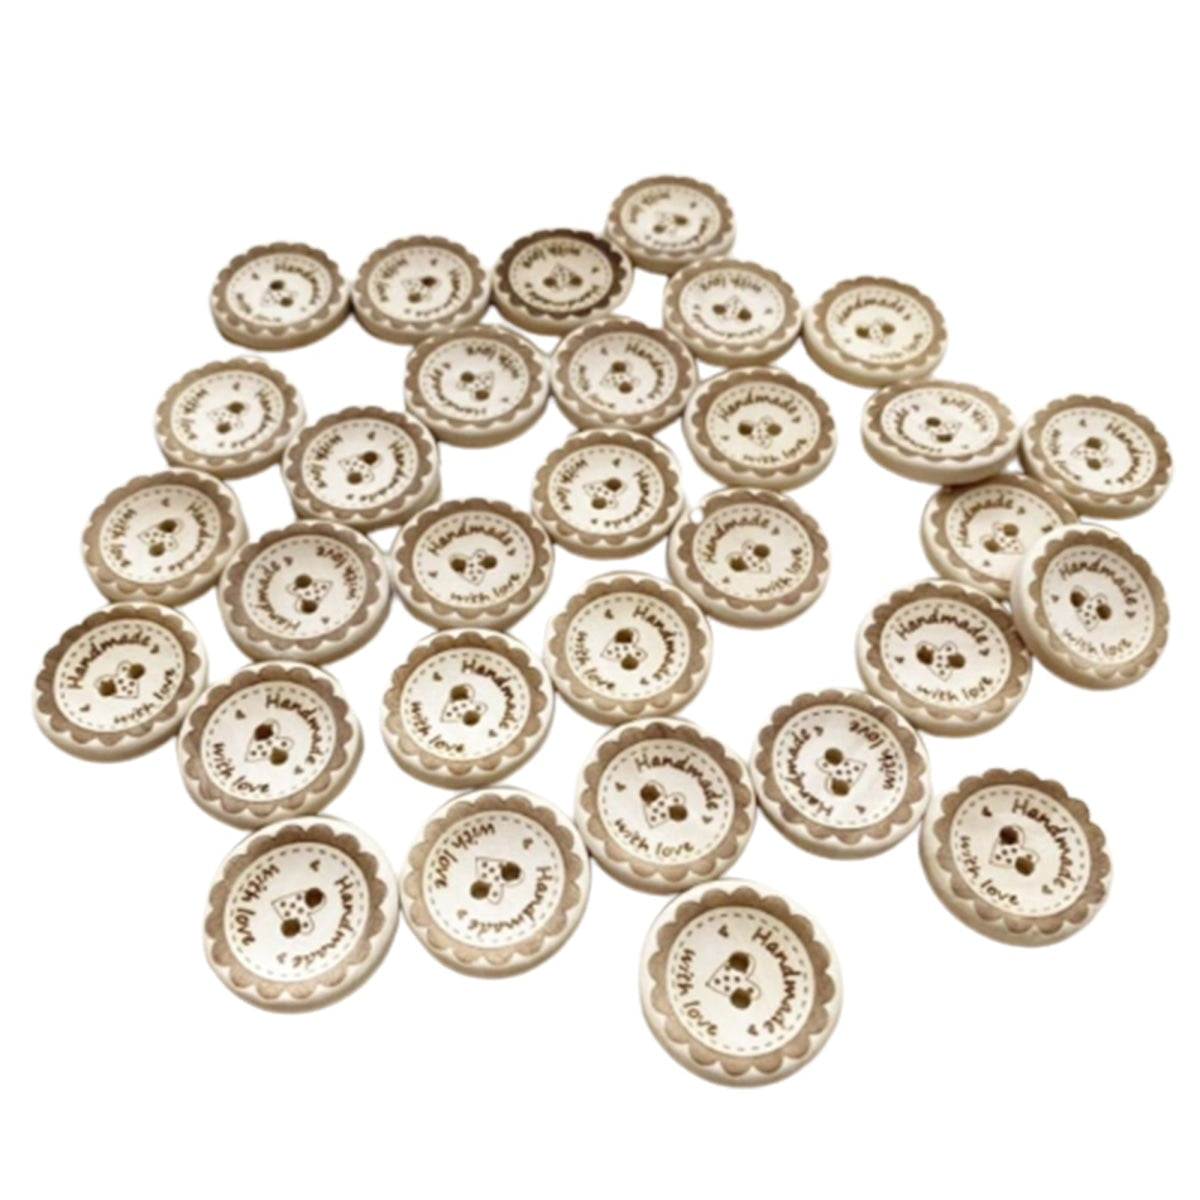 50Pcs 20Mm Wooden Buttons Handmade With Love Round For Clothes Clothing